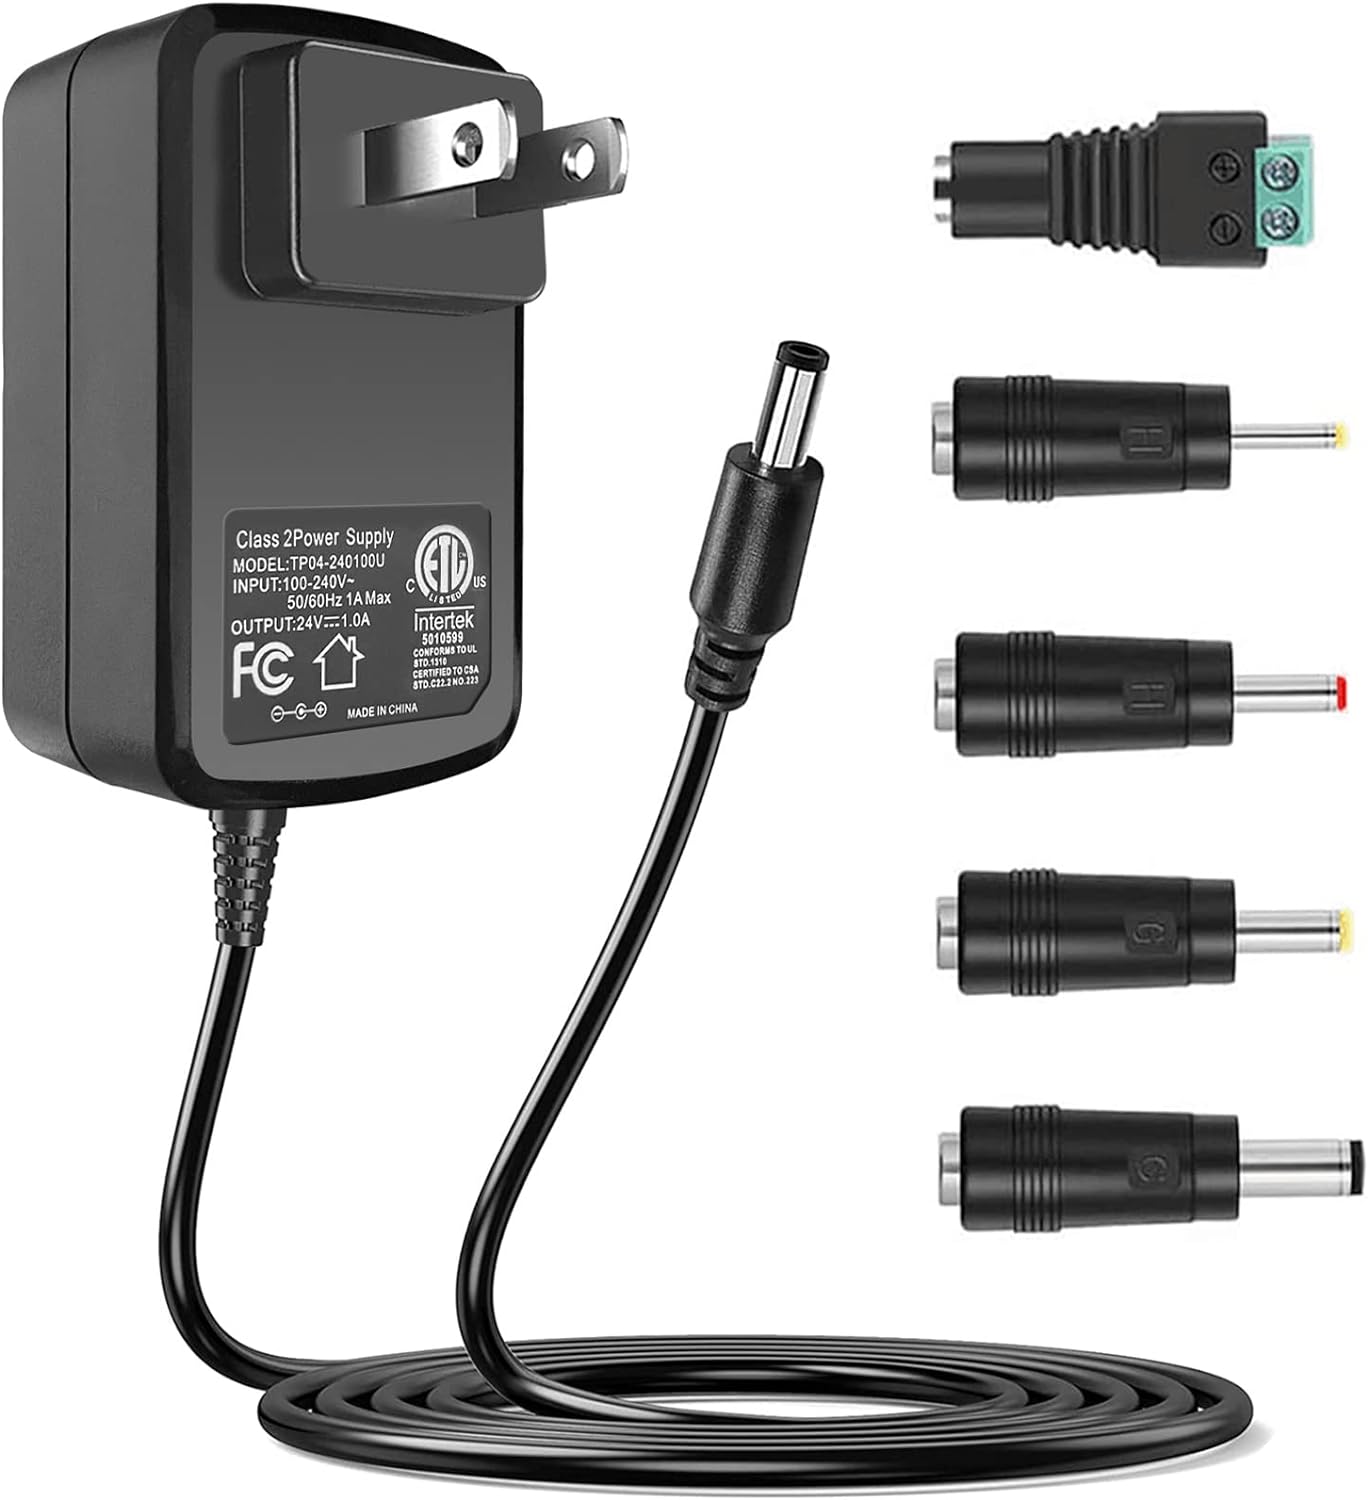 Charger Replacement for Shark Compatible with Shark CH950 CH950C CH951 CH951C CH955 CH963AMZ CH964AMZ Cordless Handheld